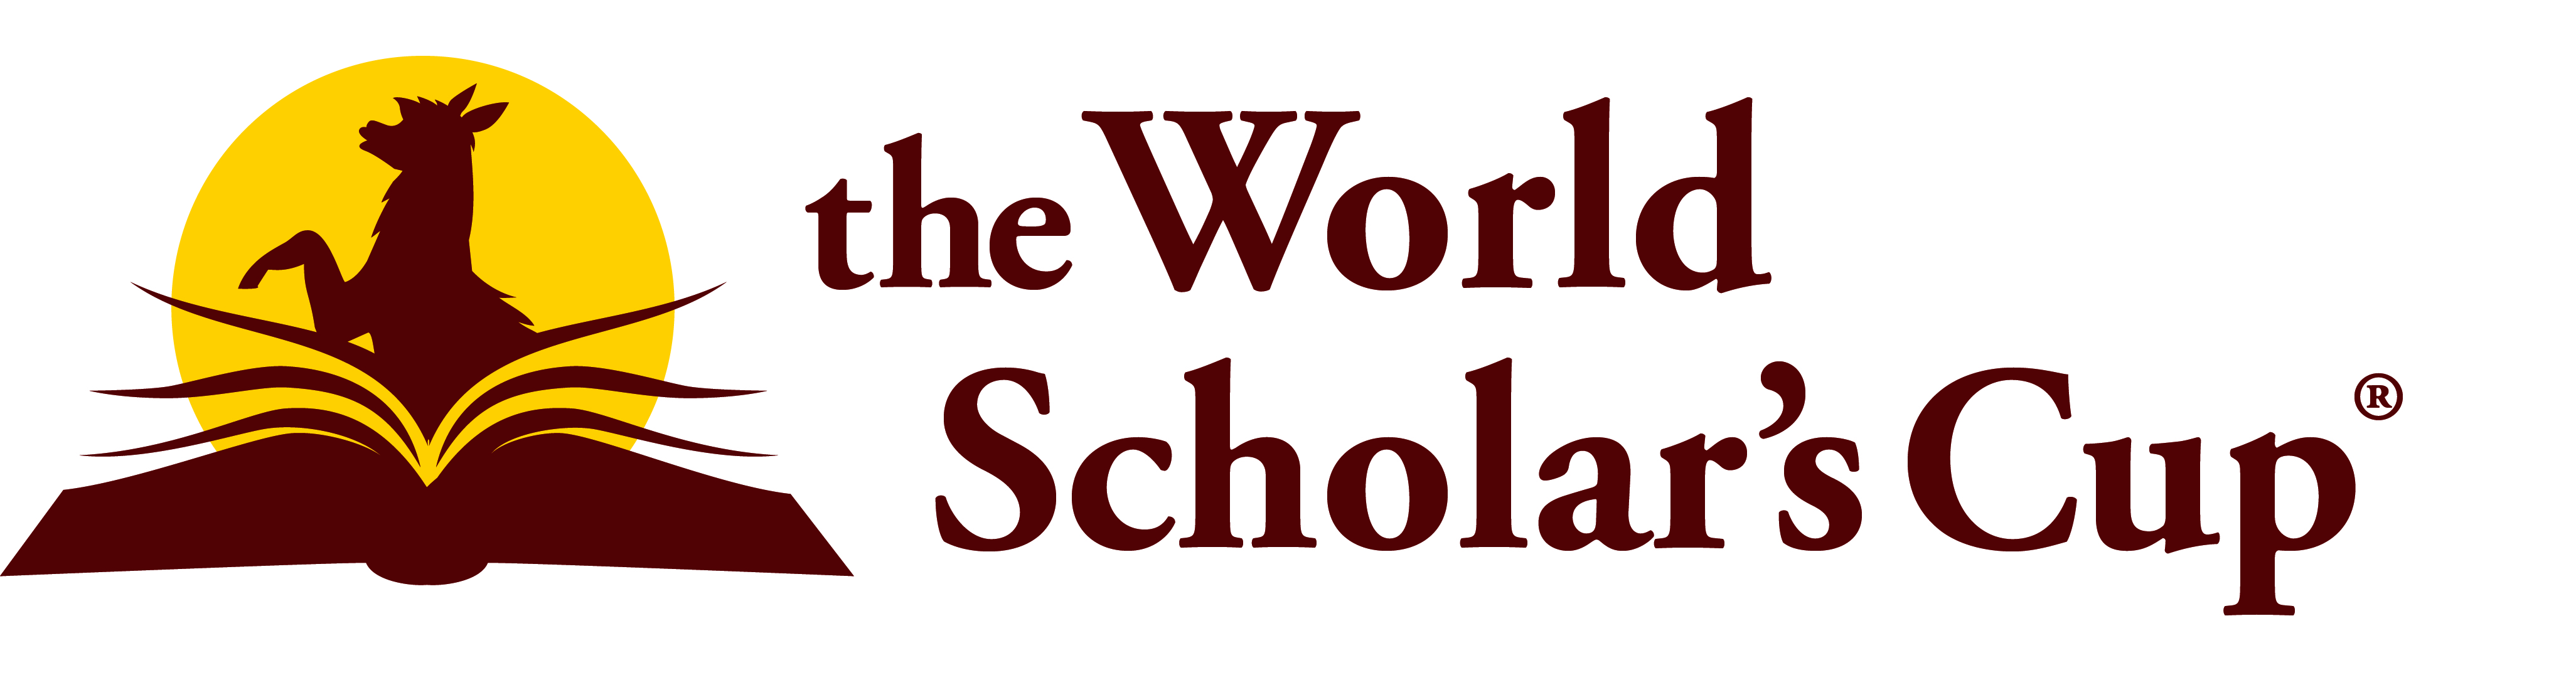 World Scholar's Cup to Draw 2,300 Students from 30 Countries to Singapore